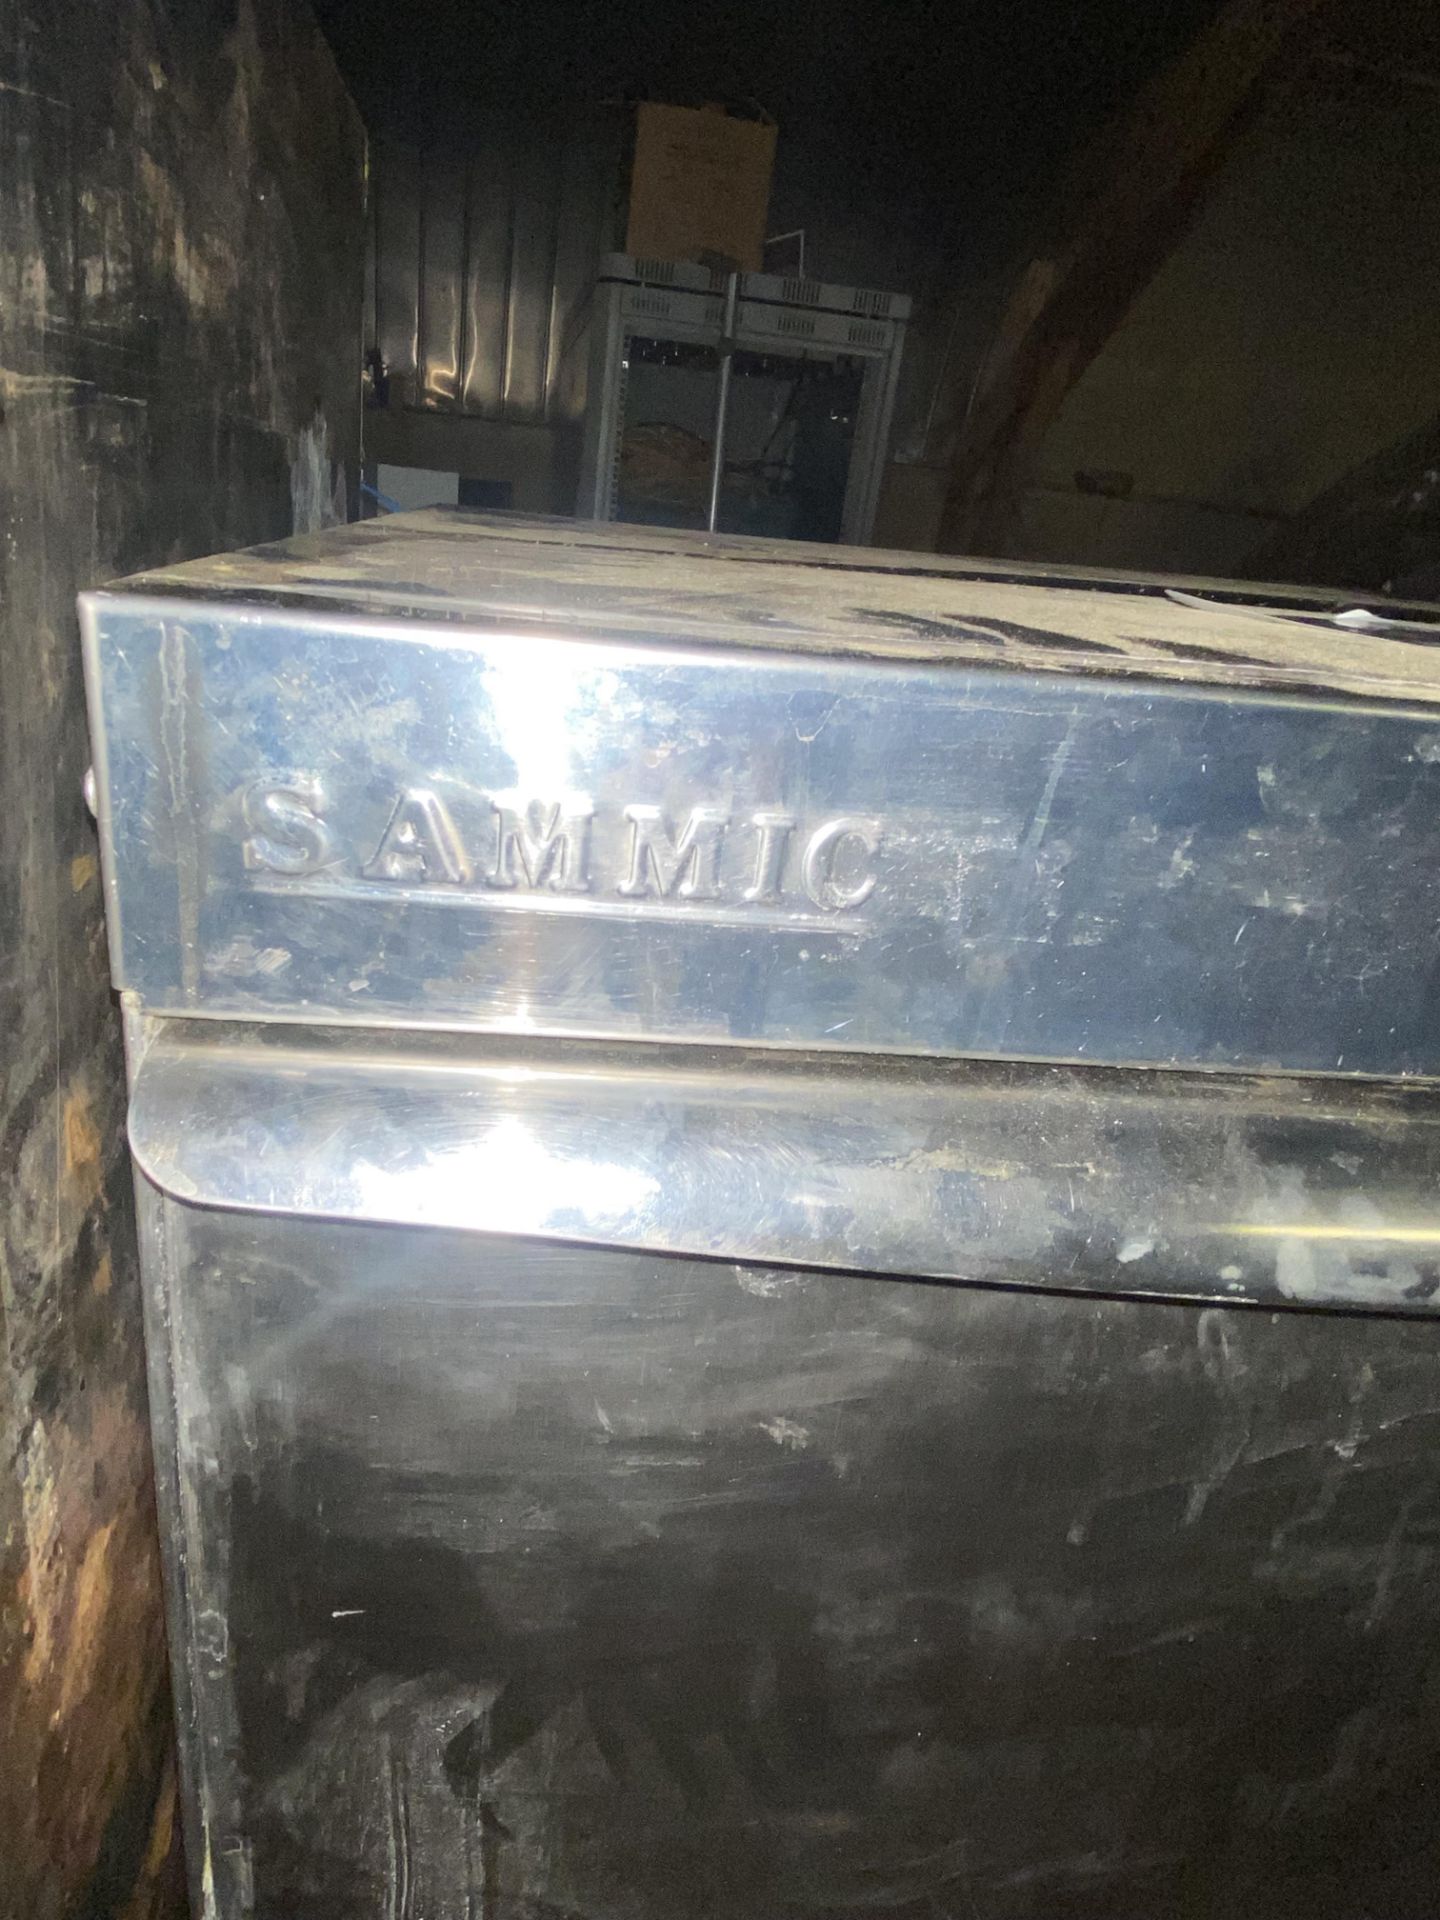 Stainless steel Sammic dishwasher and stainless steel Mono BX oven (working condition unknown) - Image 3 of 3